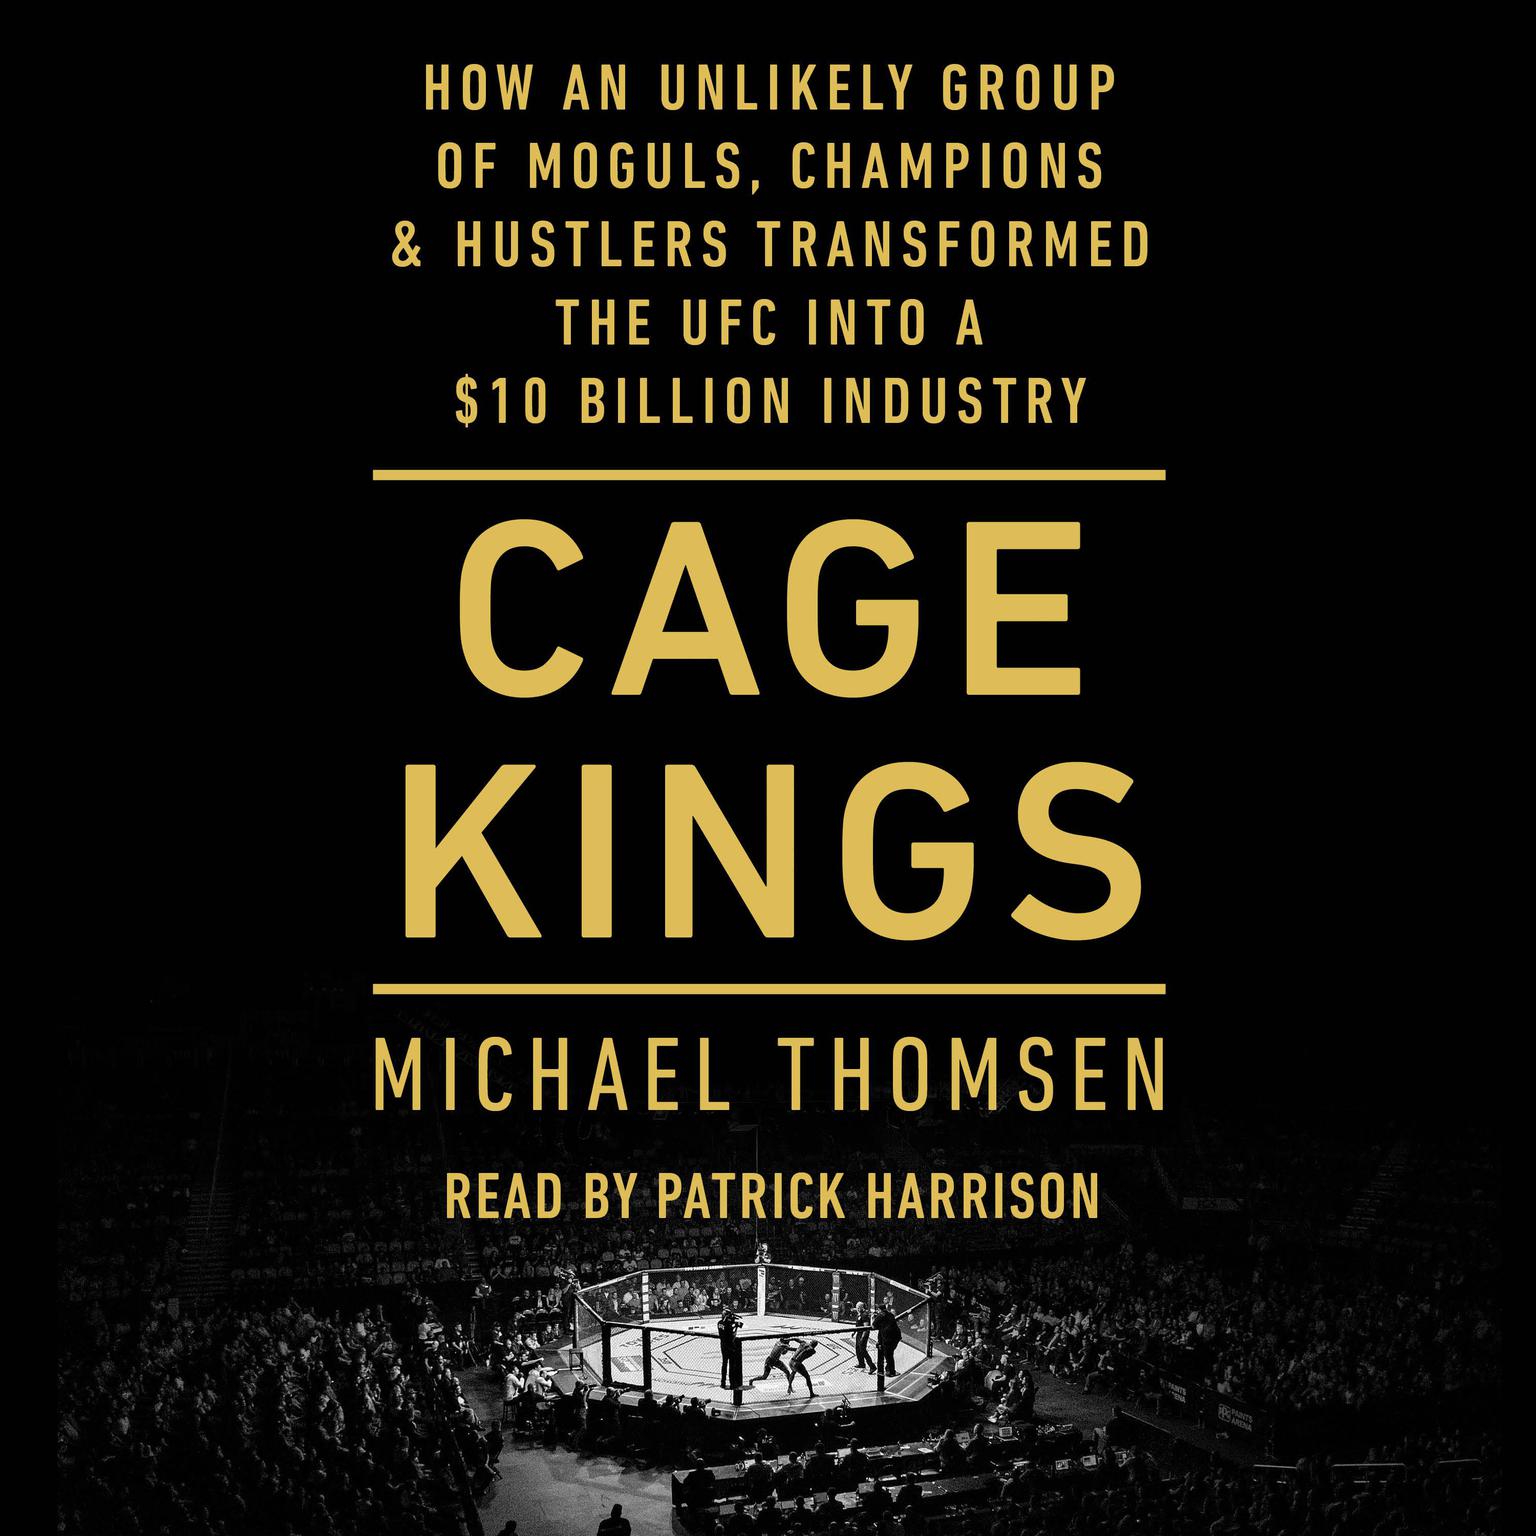 Cage Kings: How an Unlikely Group of Moguls, Champions & Hustlers Transformed the UFC into a $10 Billion Industry Audiobook, by Michael Thomsen